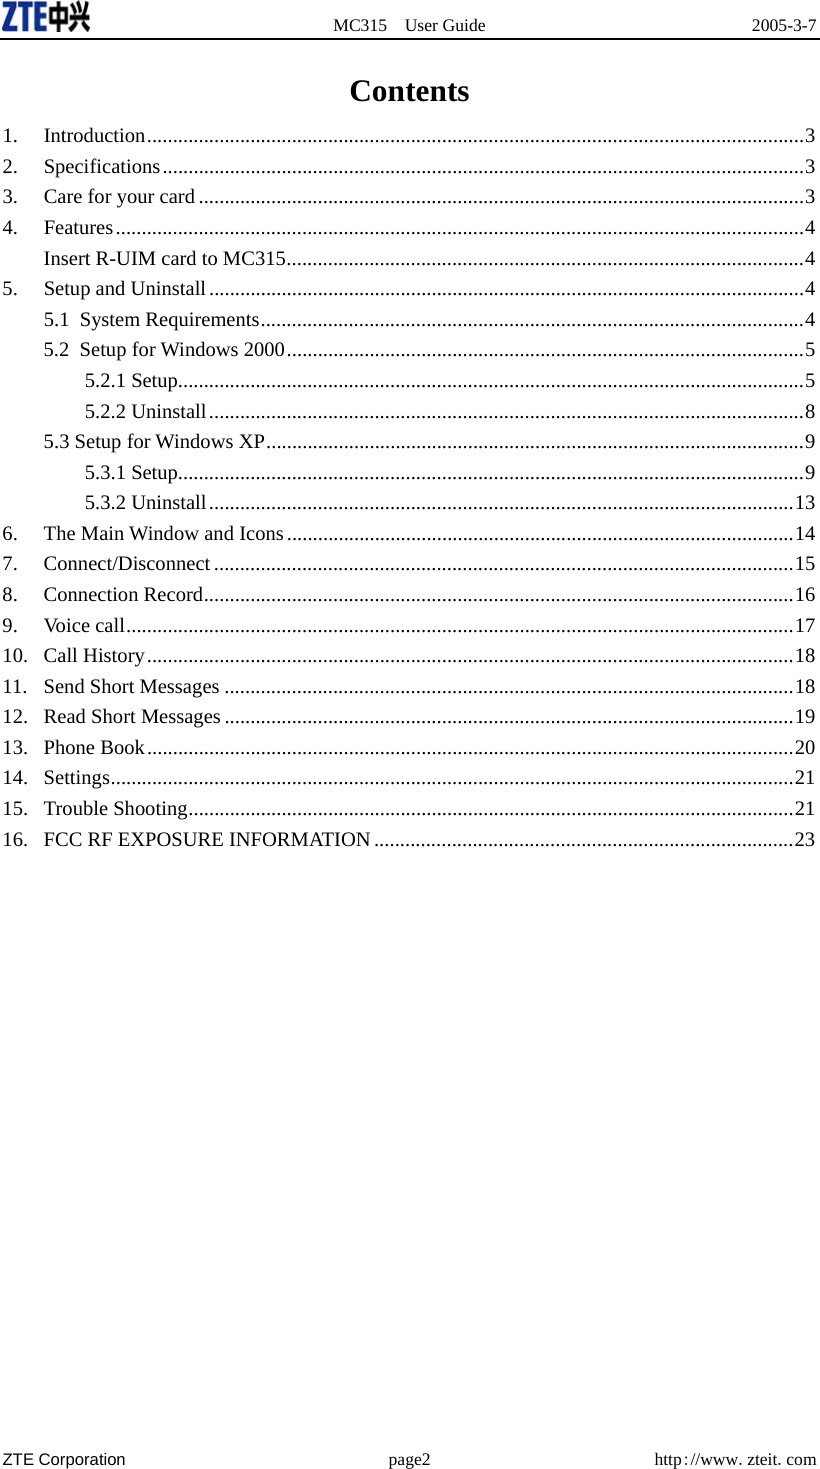  MC315 User Guide  2005-3-7  ZTE Corporation page2 http://www.zteit.com Contents 1. Introduction...............................................................................................................................3 2. Specifications............................................................................................................................3 3. Care for your card .....................................................................................................................3 4. Features.....................................................................................................................................4 Insert R-UIM card to MC315....................................................................................................4 5. Setup and Uninstall...................................................................................................................4 5.1 System Requirements.........................................................................................................4 5.2 Setup for Windows 2000....................................................................................................5 5.2.1 Setup.........................................................................................................................5 5.2.2 Uninstall...................................................................................................................8 5.3 Setup for Windows XP........................................................................................................9 5.3.1 Setup.........................................................................................................................9 5.3.2 Uninstall.................................................................................................................13 6.  The Main Window and Icons..................................................................................................14 7. Connect/Disconnect ................................................................................................................15 8. Connection Record..................................................................................................................16 9. Voice call.................................................................................................................................17 10. Call History.............................................................................................................................18 11.  Send Short Messages ..............................................................................................................18 12.  Read Short Messages ..............................................................................................................19 13. Phone Book.............................................................................................................................20 14. Settings....................................................................................................................................21 15. Trouble Shooting.....................................................................................................................21 16.  FCC RF EXPOSURE INFORMATION .................................................................................23  